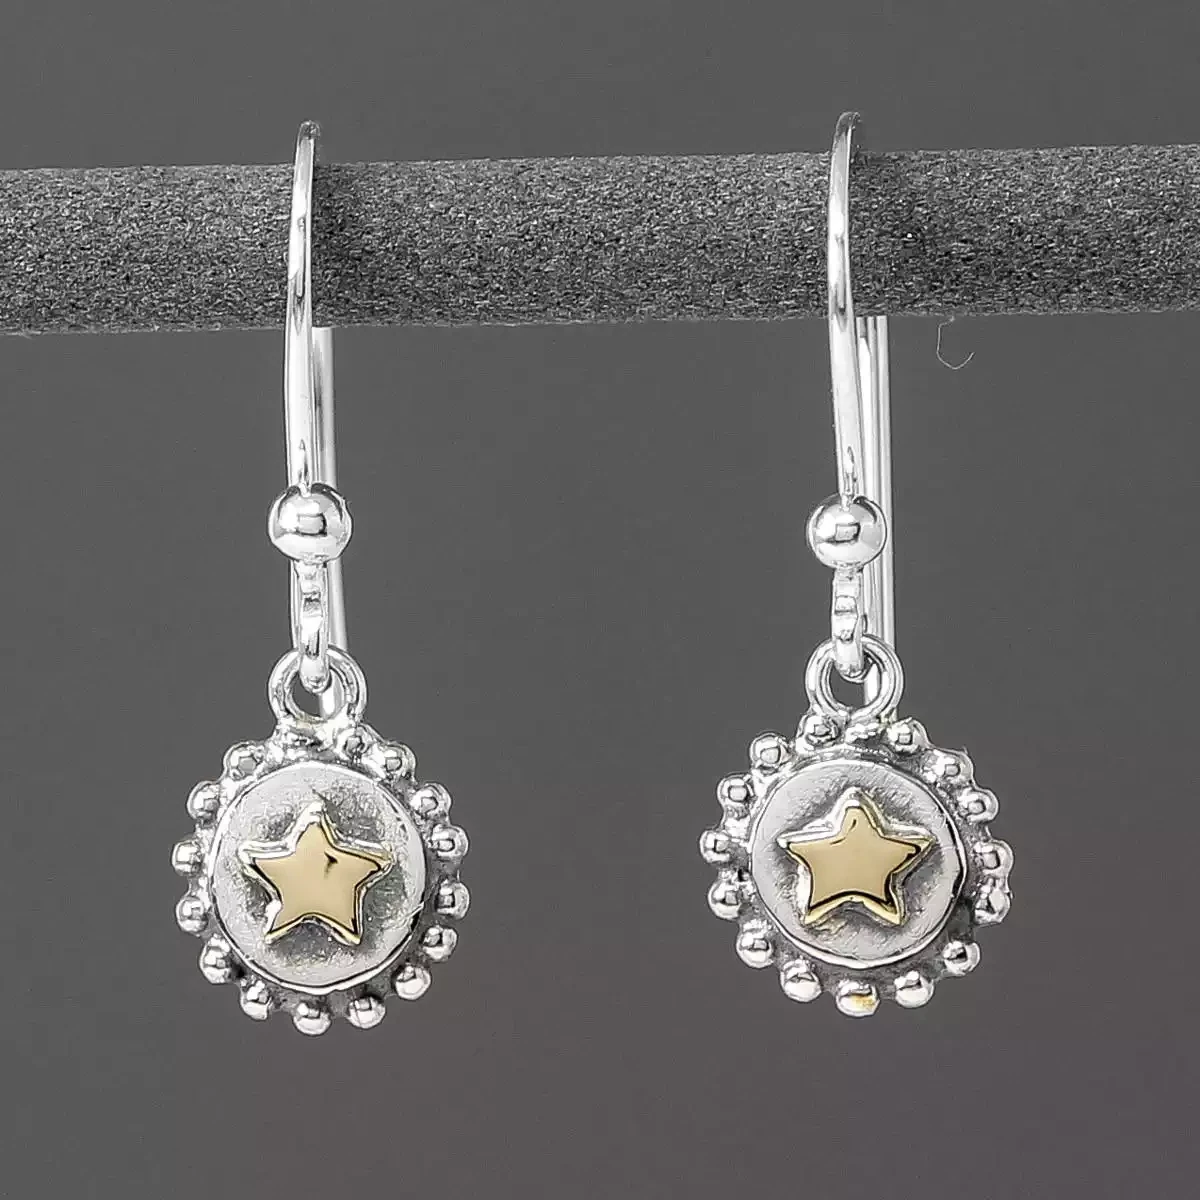 Reach for the Stars Silver and Gold Little Drop Earrings by Linda Macdonald